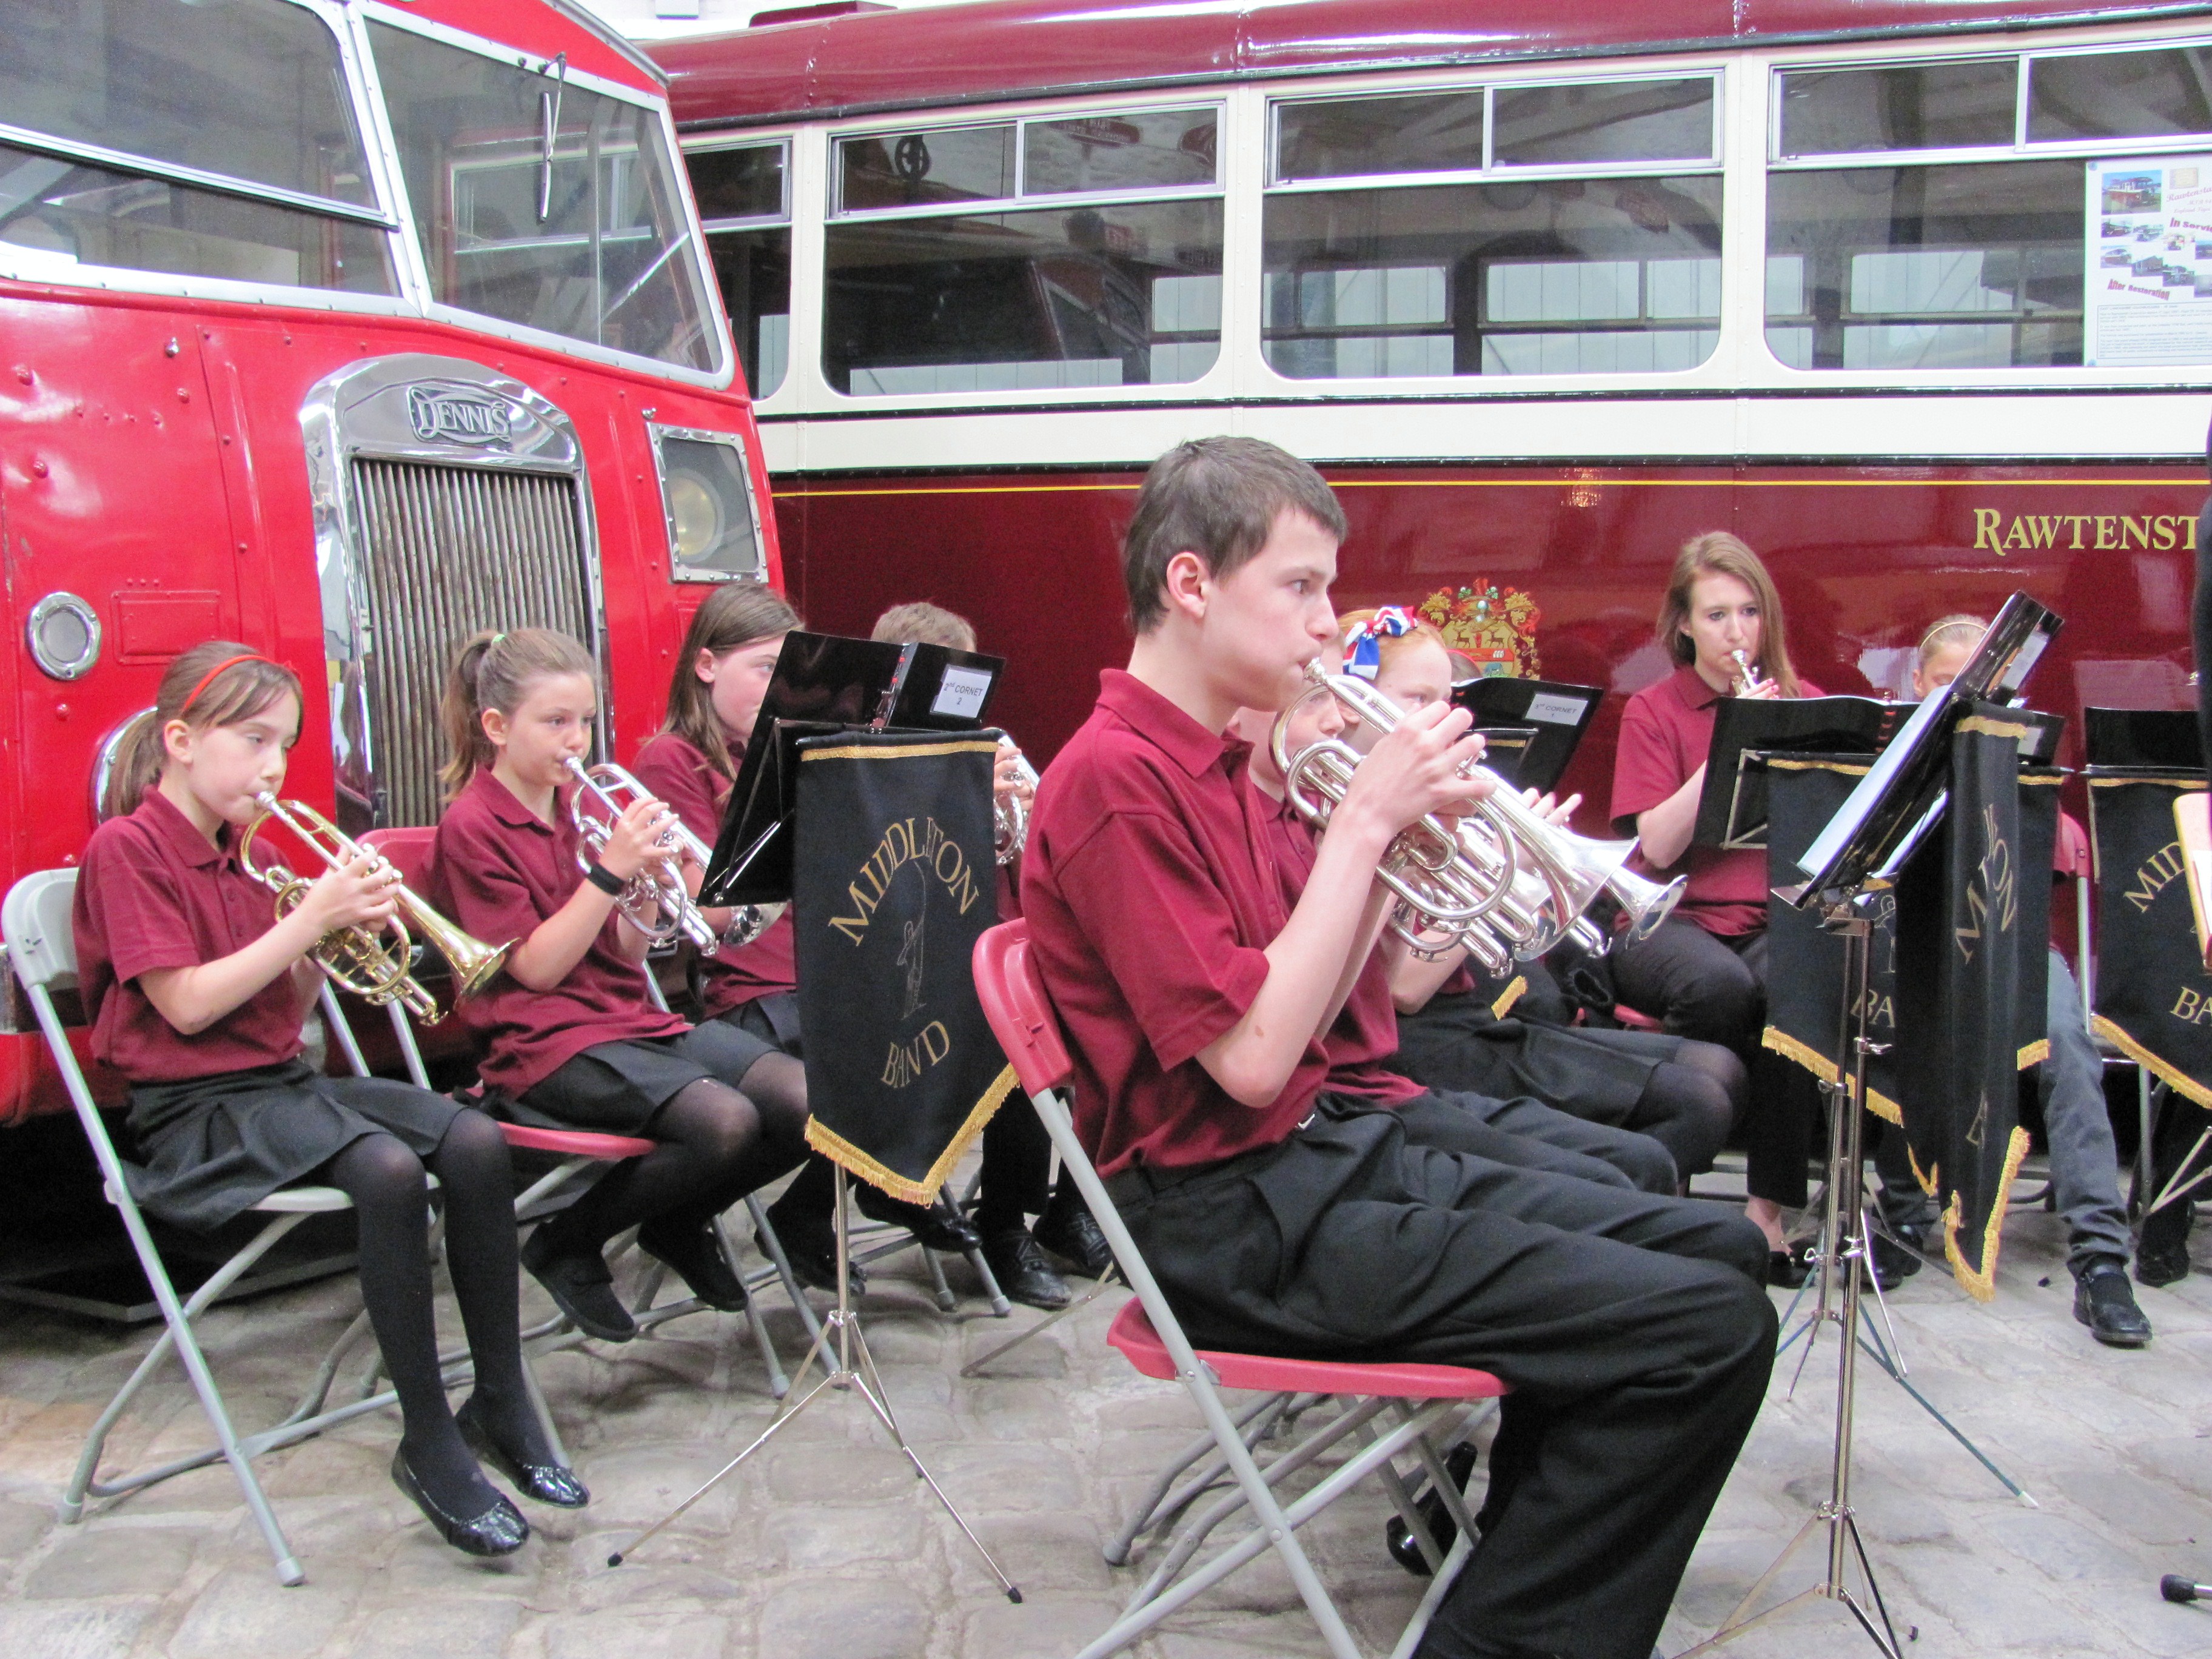 The cornets in action